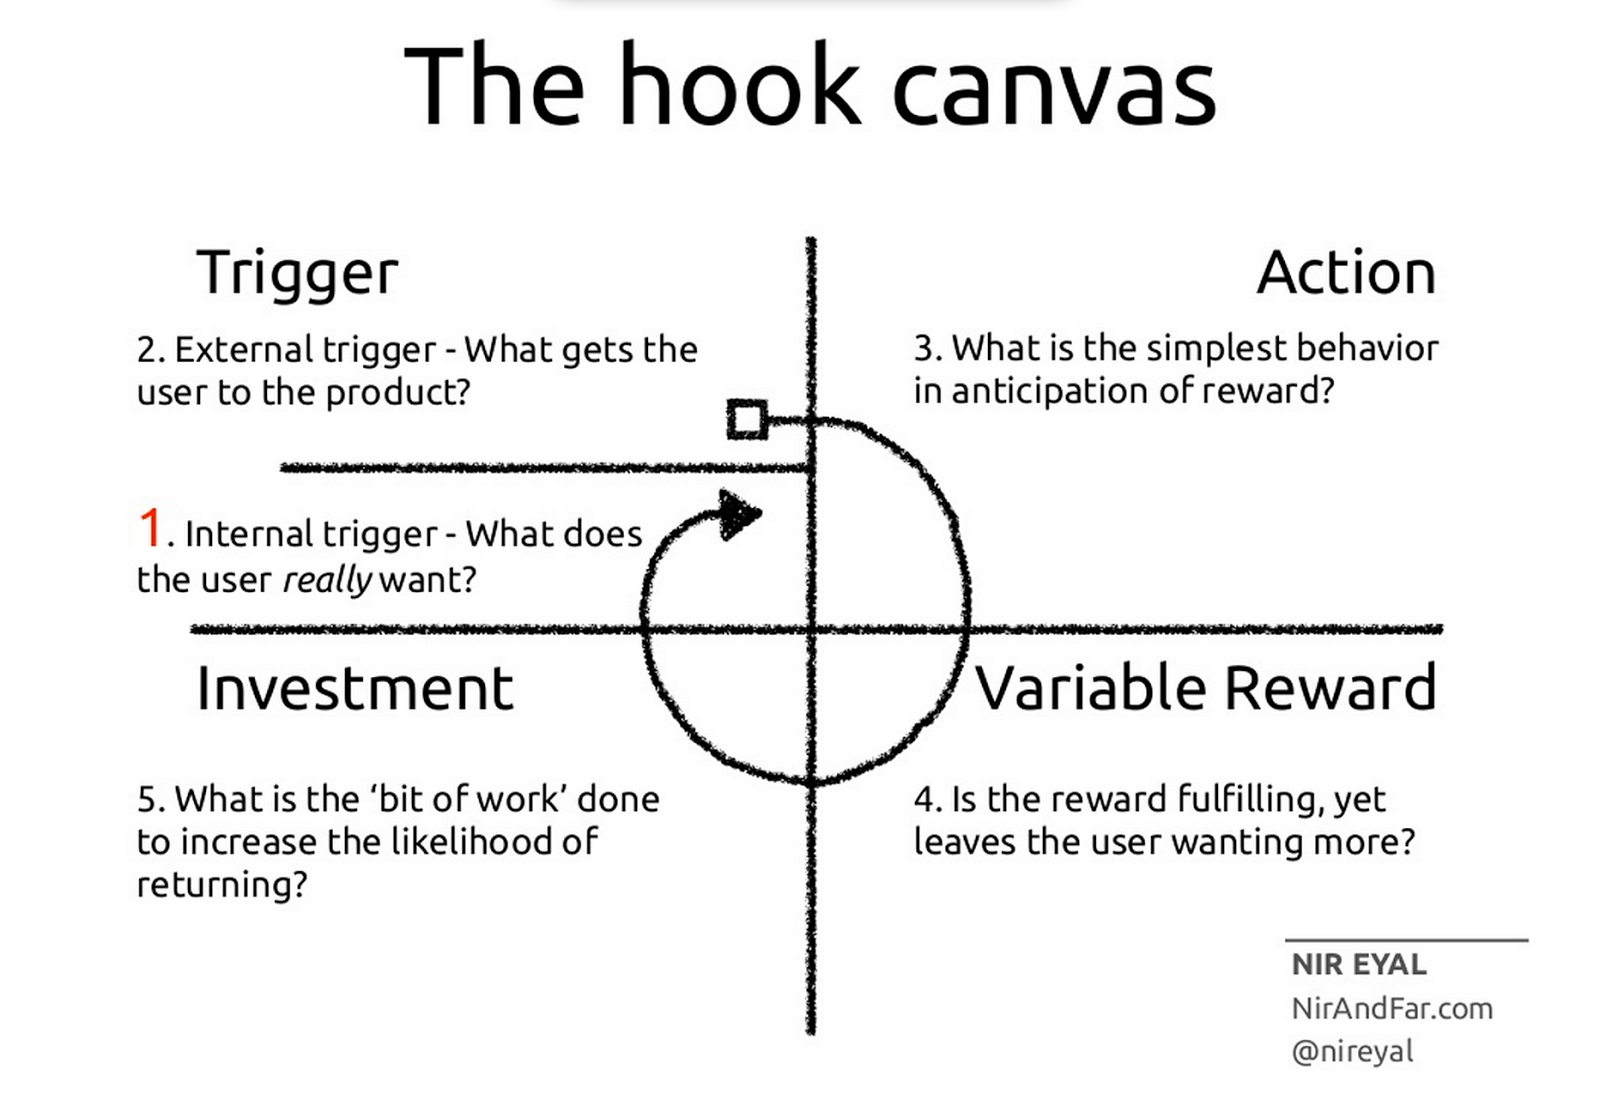 The hook canvas